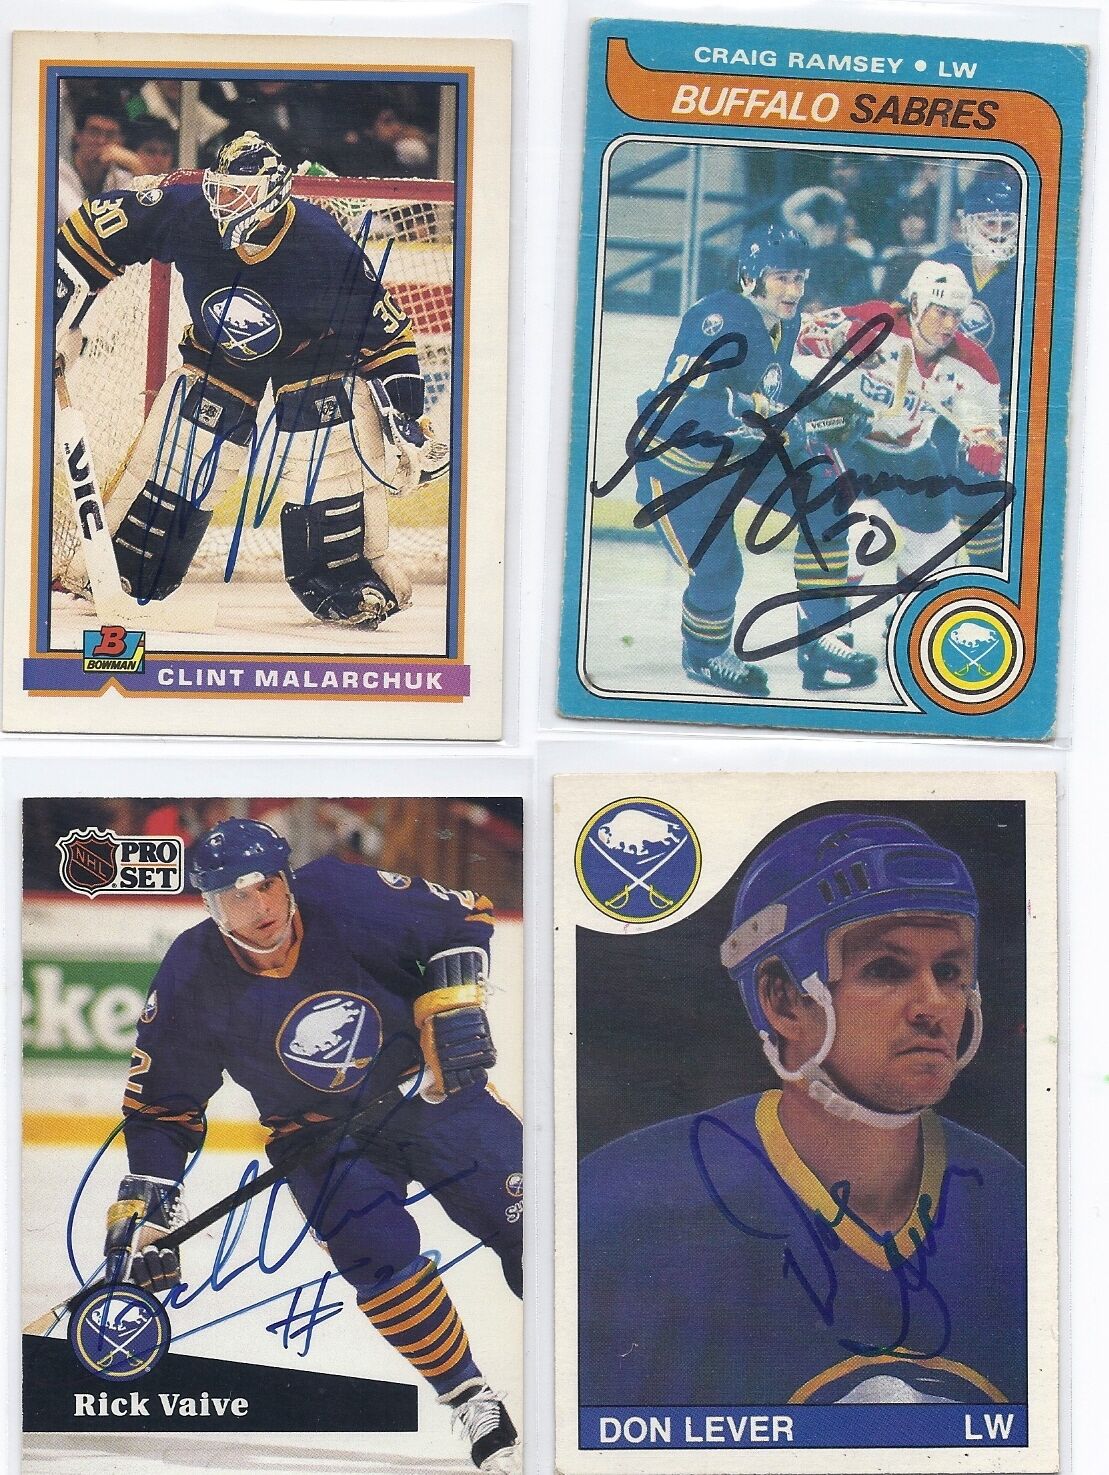 1985-86 OPC #238 Don Lever Buffalo Sabres Signed Autographed Card